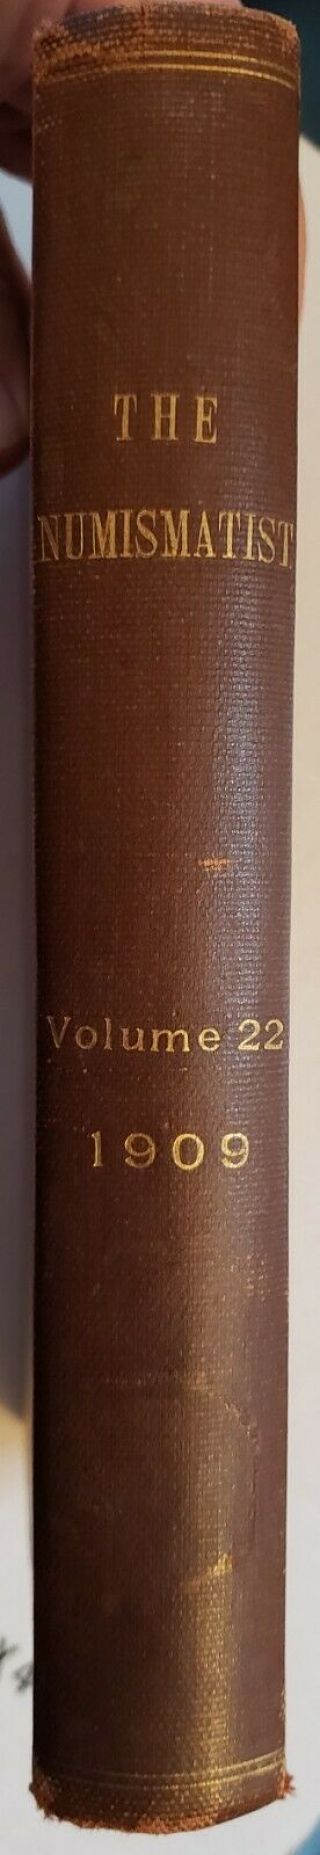 ANA The Numismatist Vol 22 1909 Zerbe Ex Chase National Bank 2